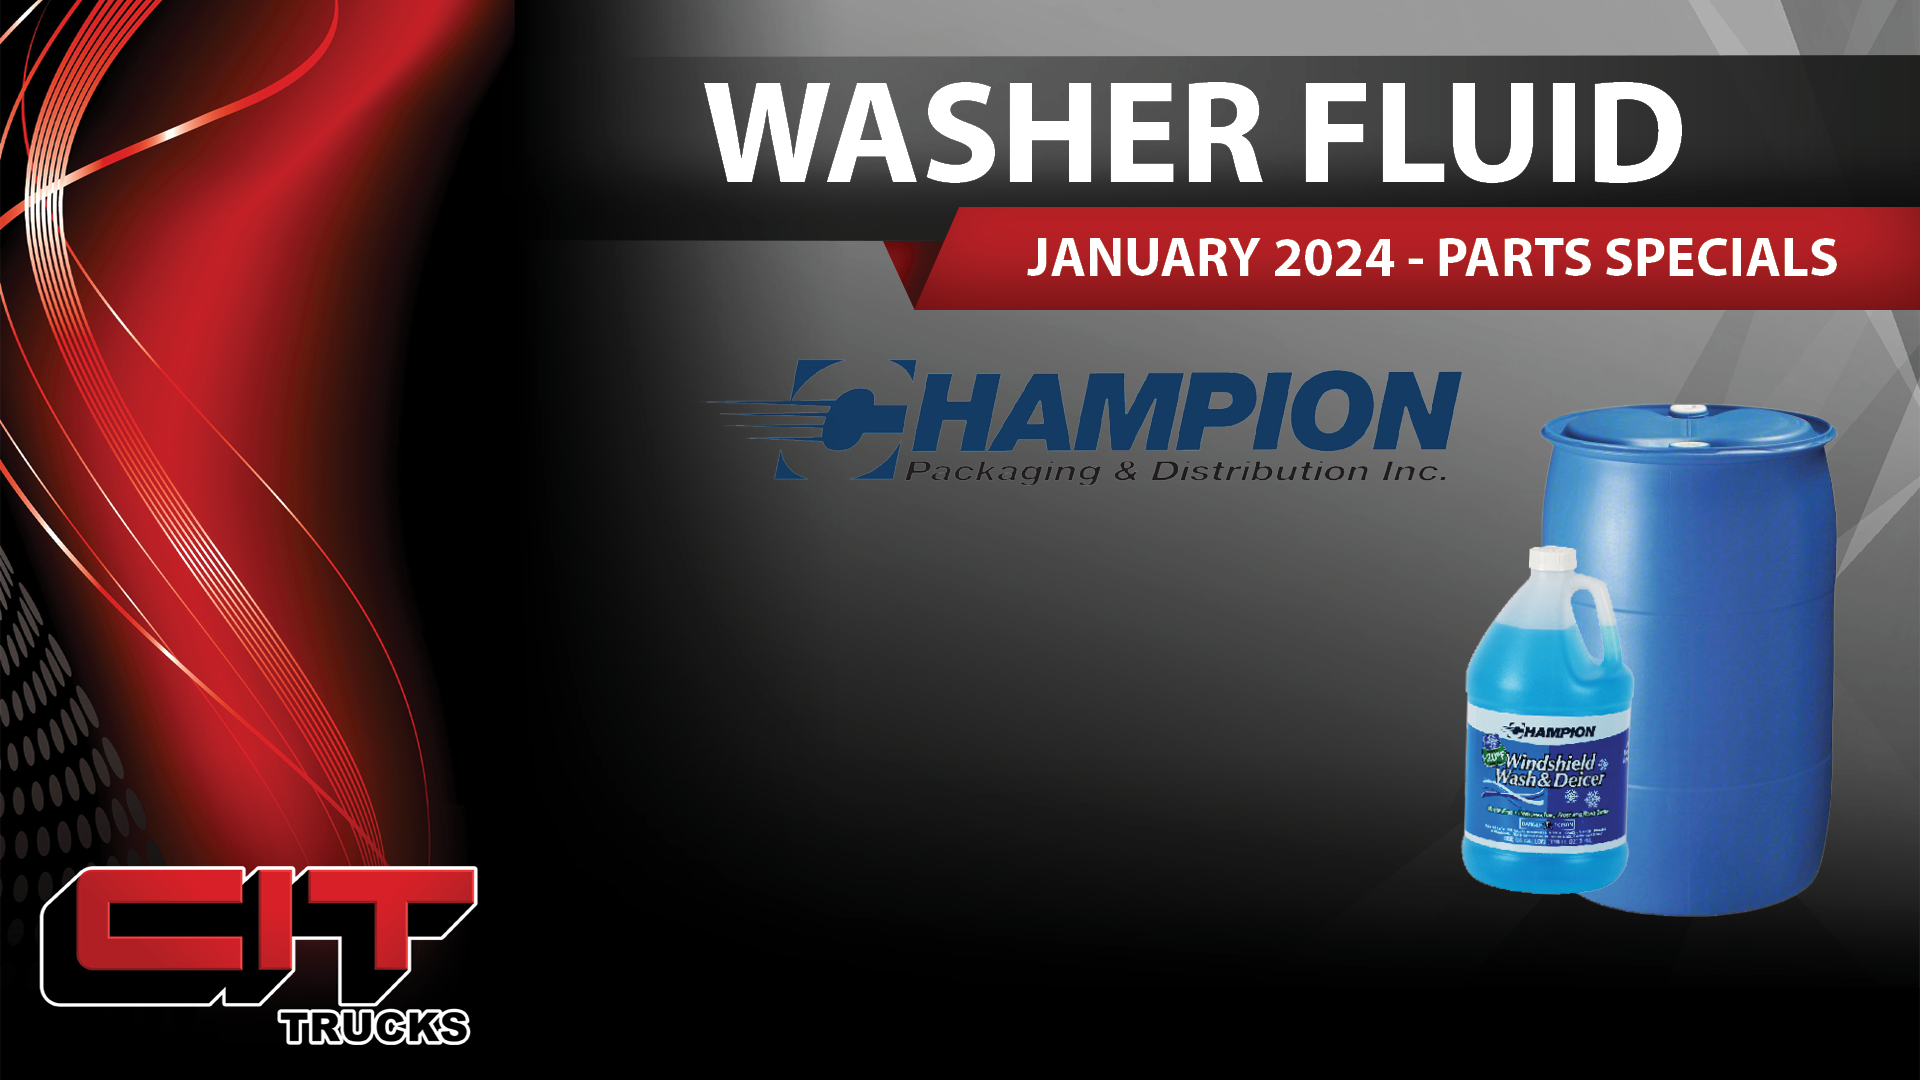 January 2024 Parts Specials – Washer Fluid